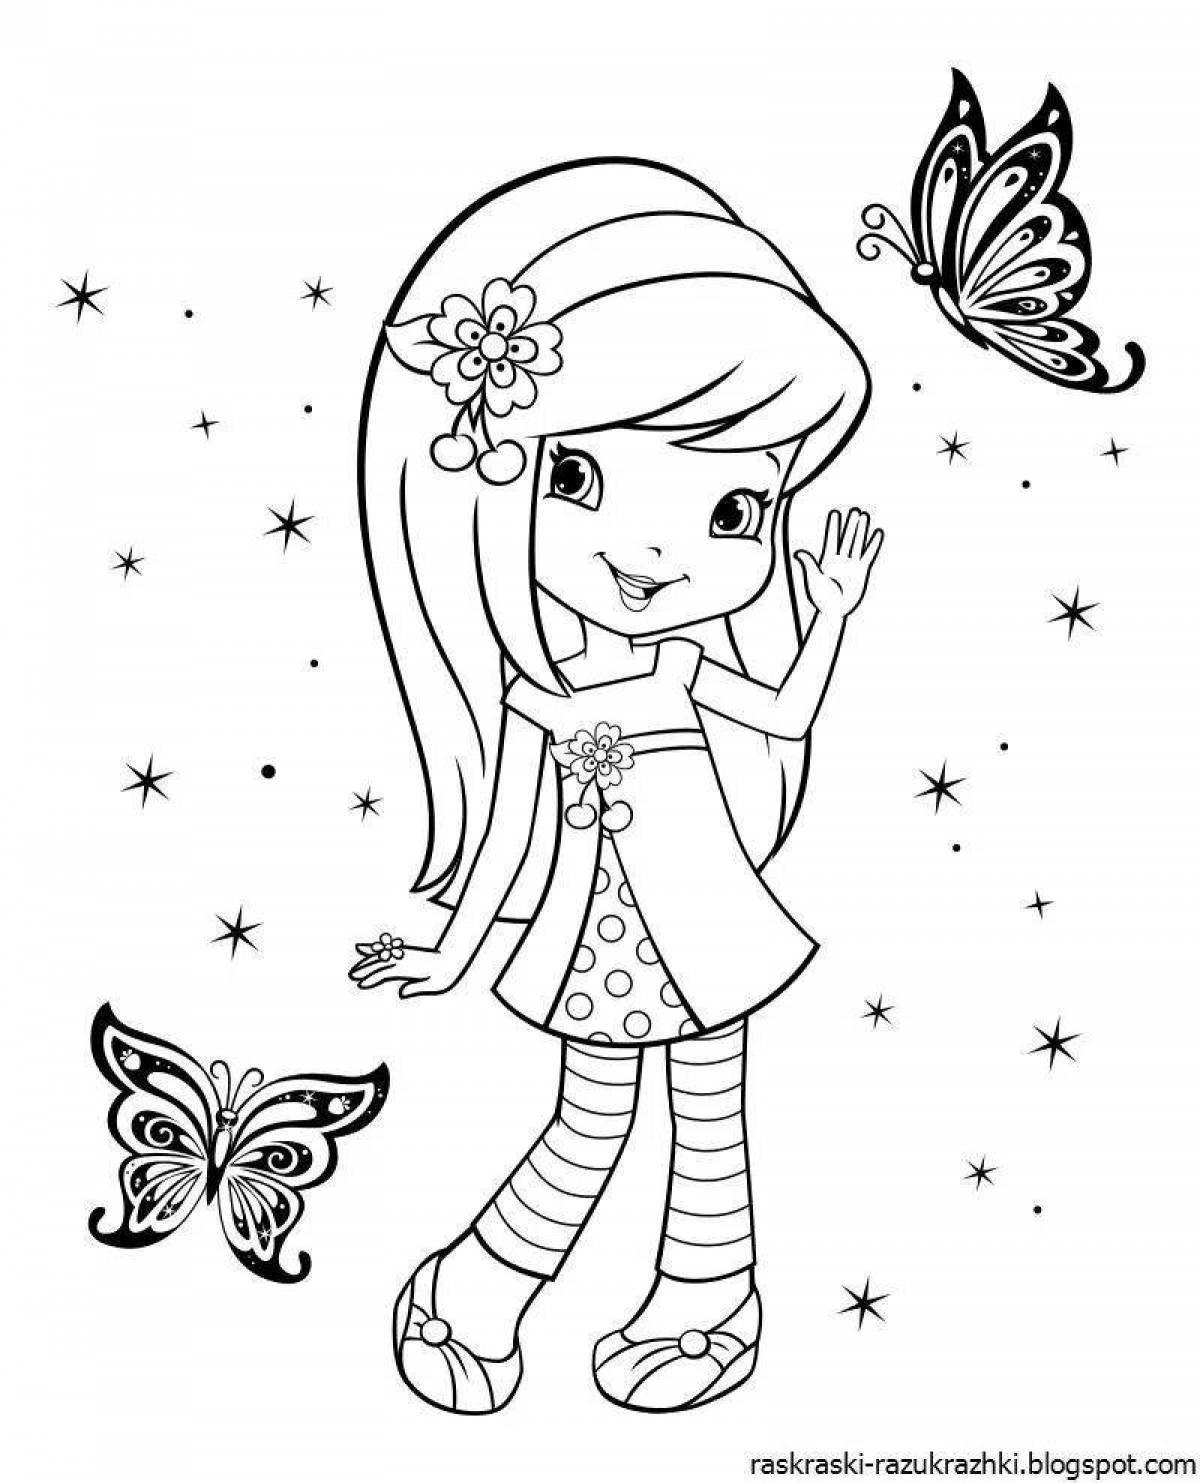 Coloring pages for girls 